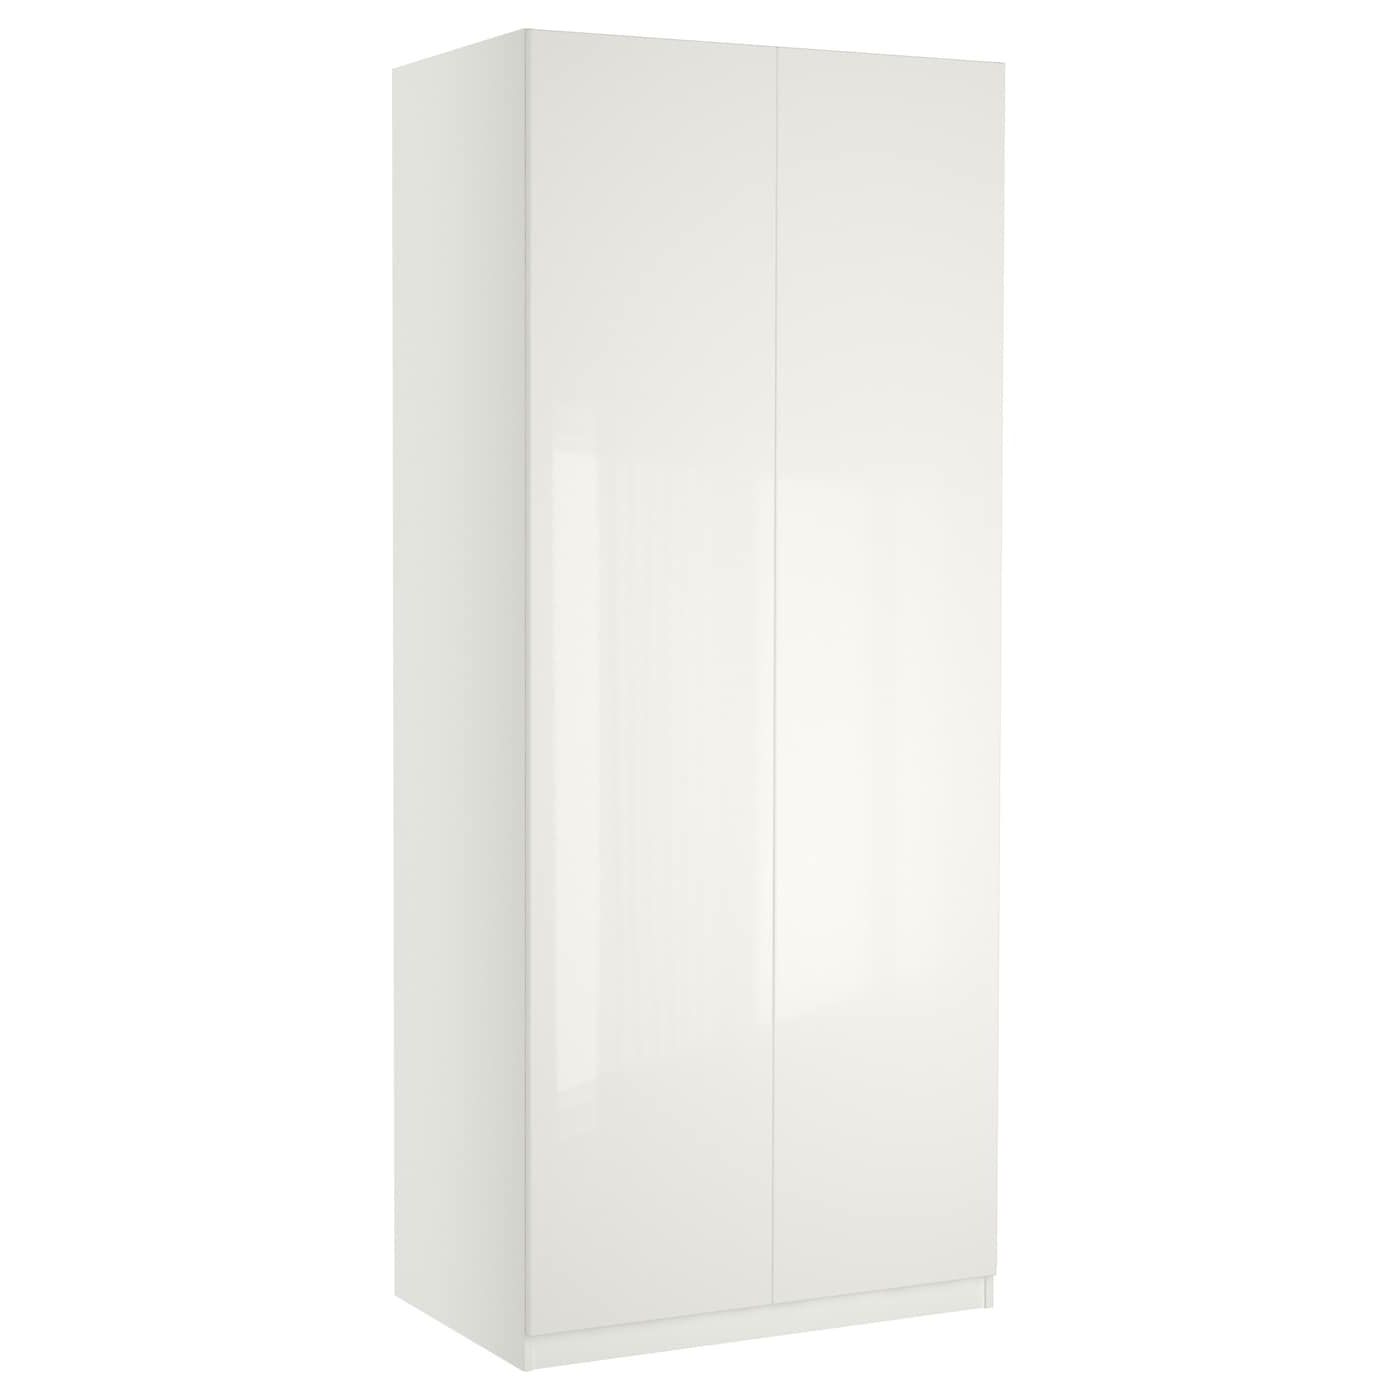 Pax / Fardal Wardrobe With 2 Doors, White/high Gloss/white, 100x60x236 Cm –  Ikea In Tall White Gloss Wardrobes (Gallery 1 of 20)